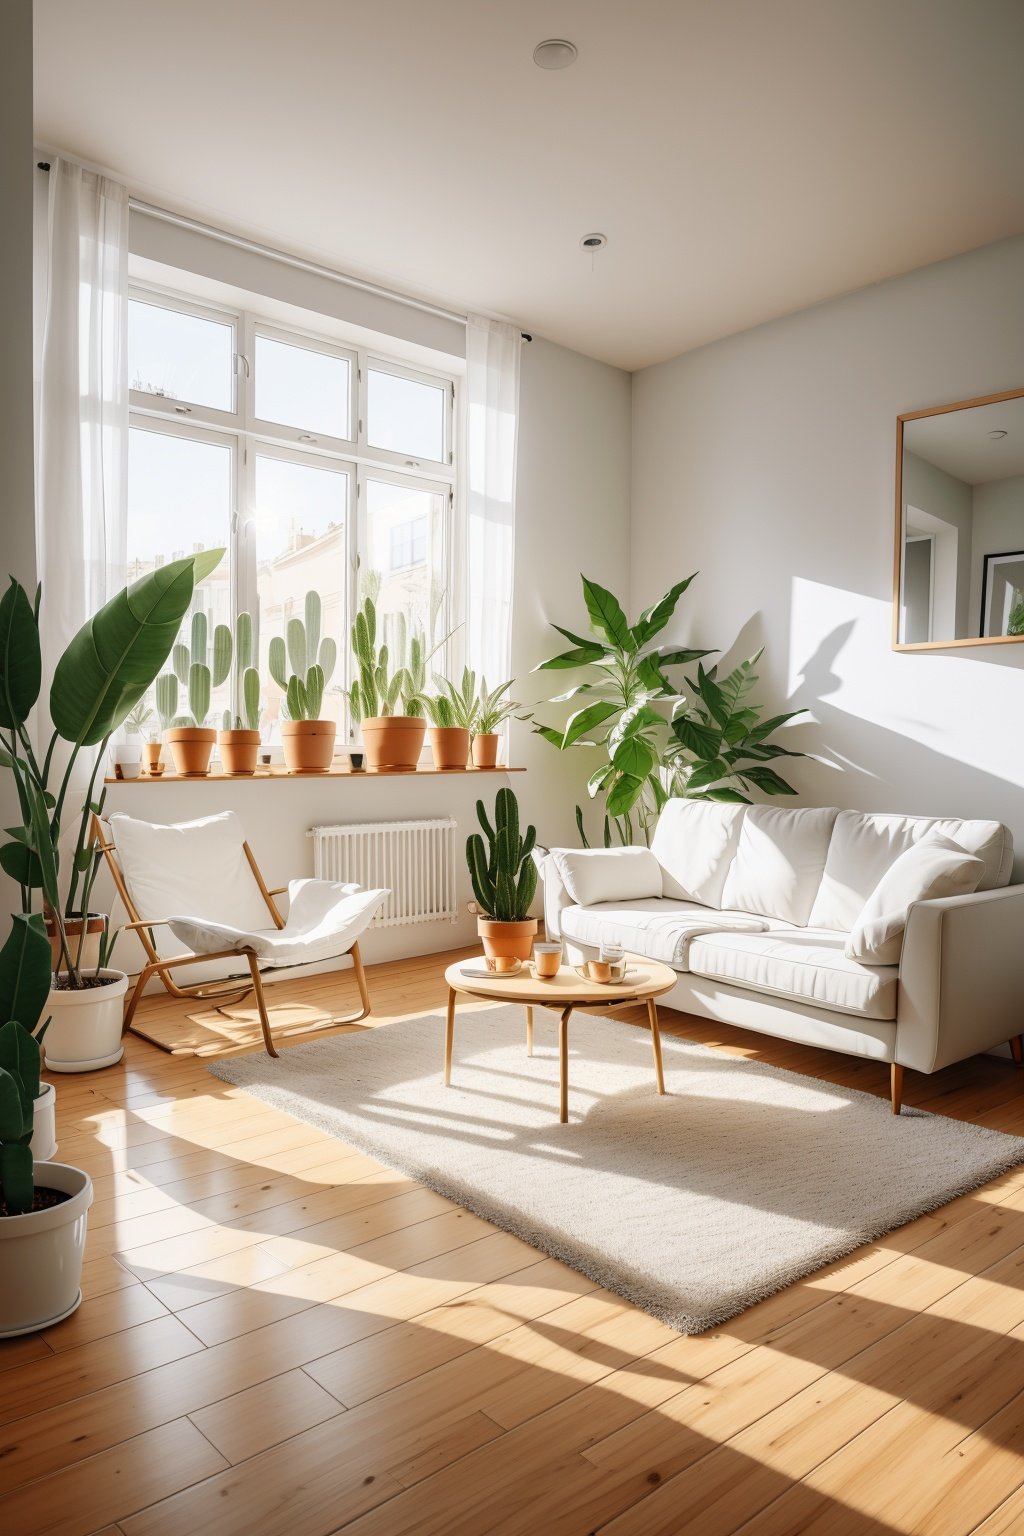 plant, potted plant, palm tree, indoors, tree, window, leaf, cactus, chair, couch, day, flower pot, wooden floor, sunlight